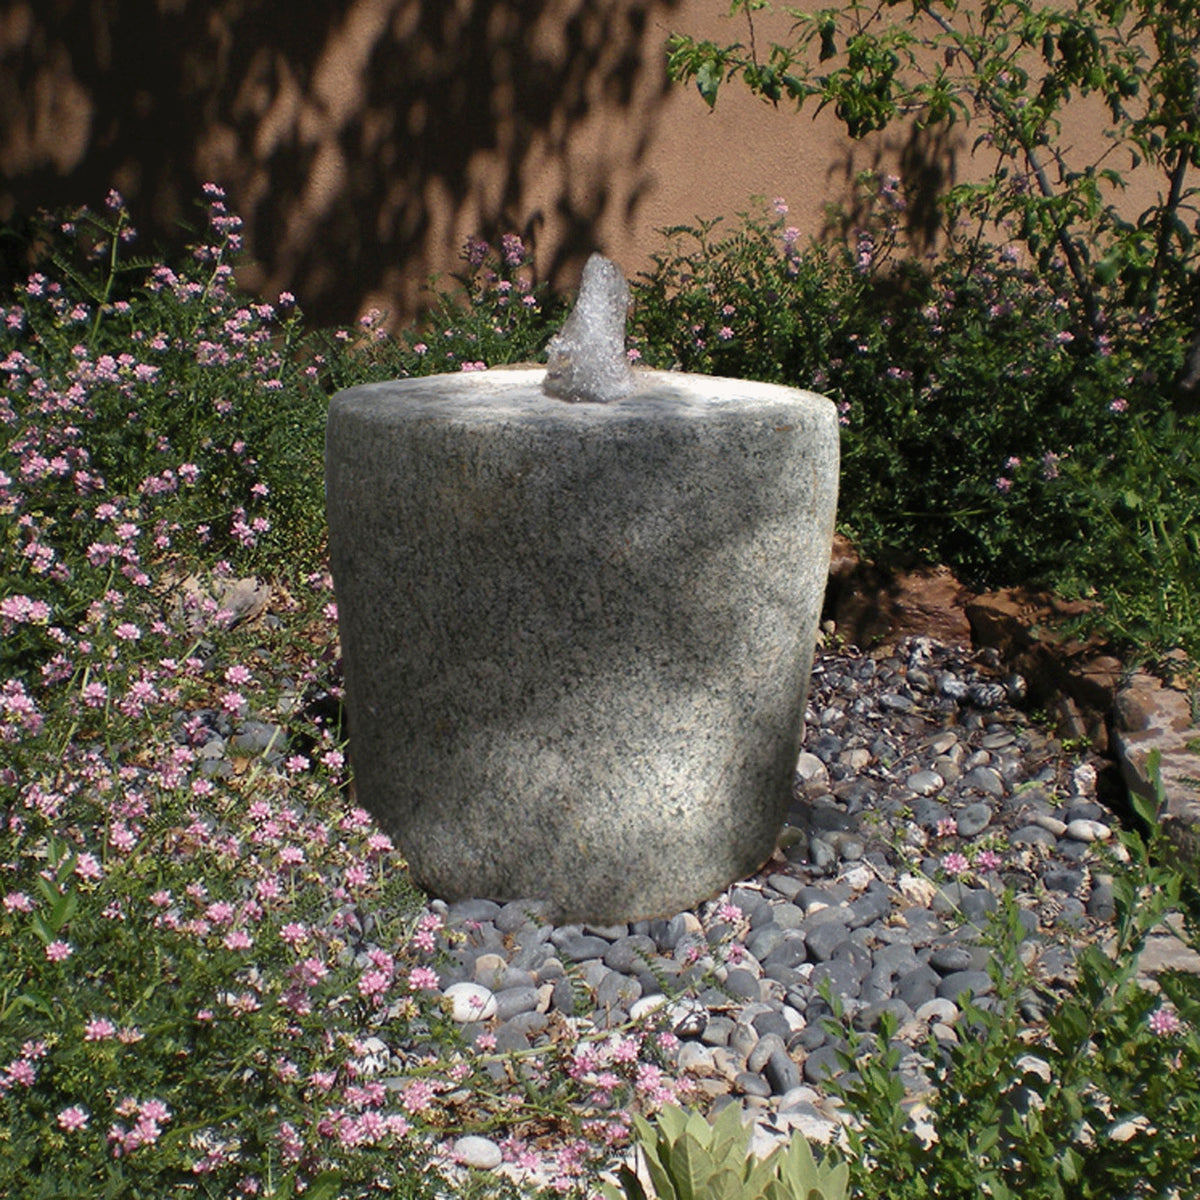 Stone Forest Antique Grindstone installed as garden fountain image 1 of 2